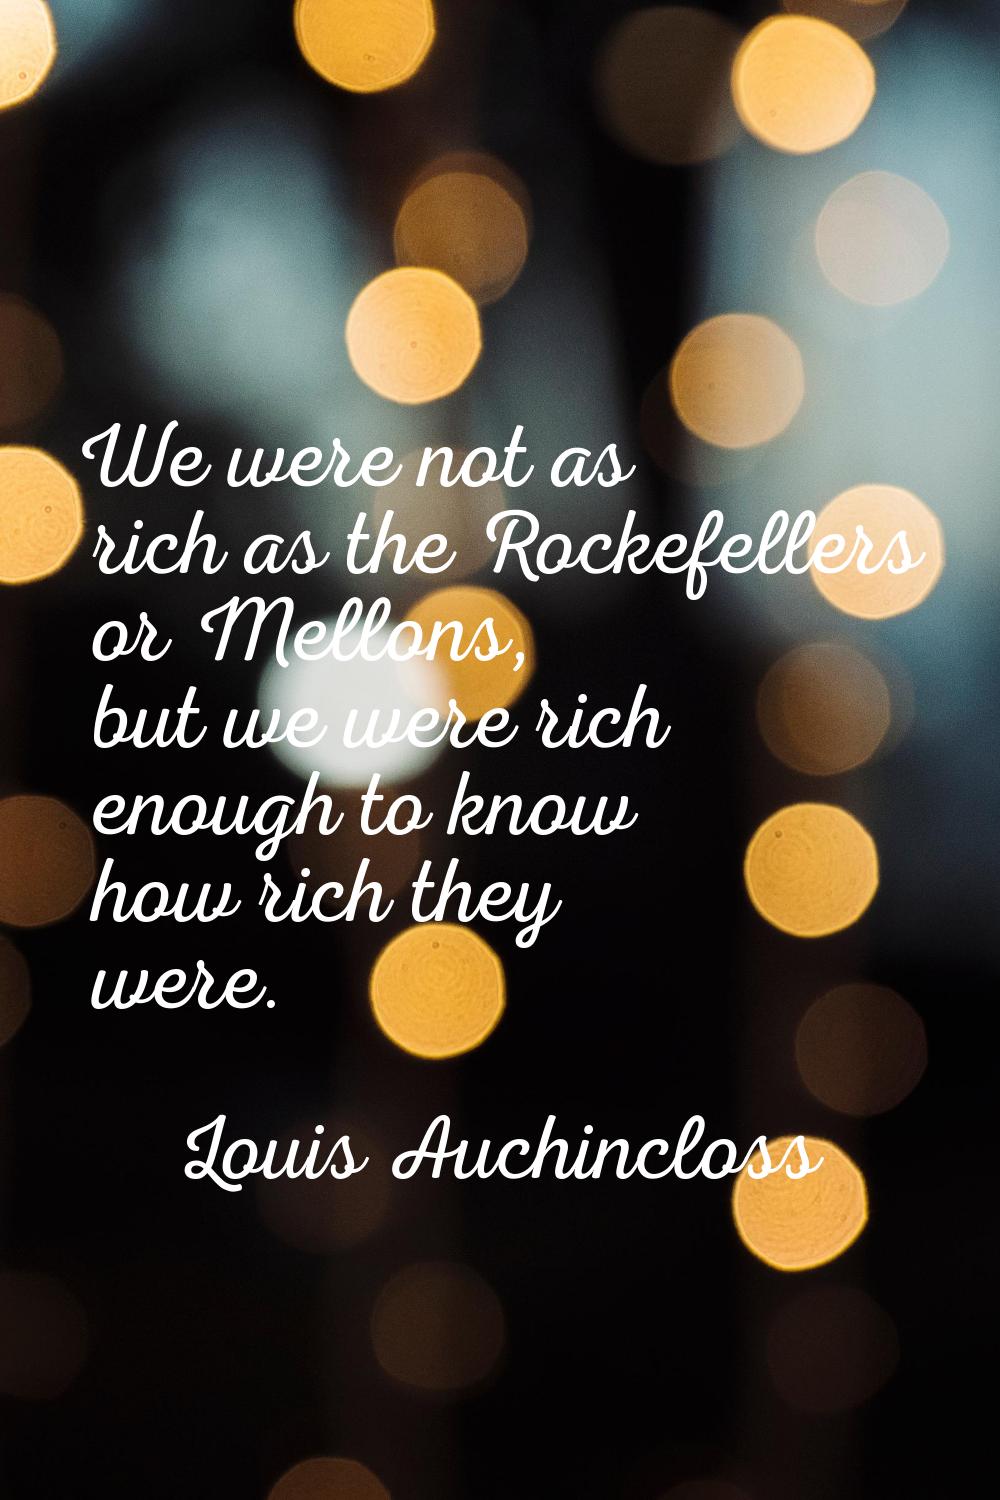 We were not as rich as the Rockefellers or Mellons, but we were rich enough to know how rich they w